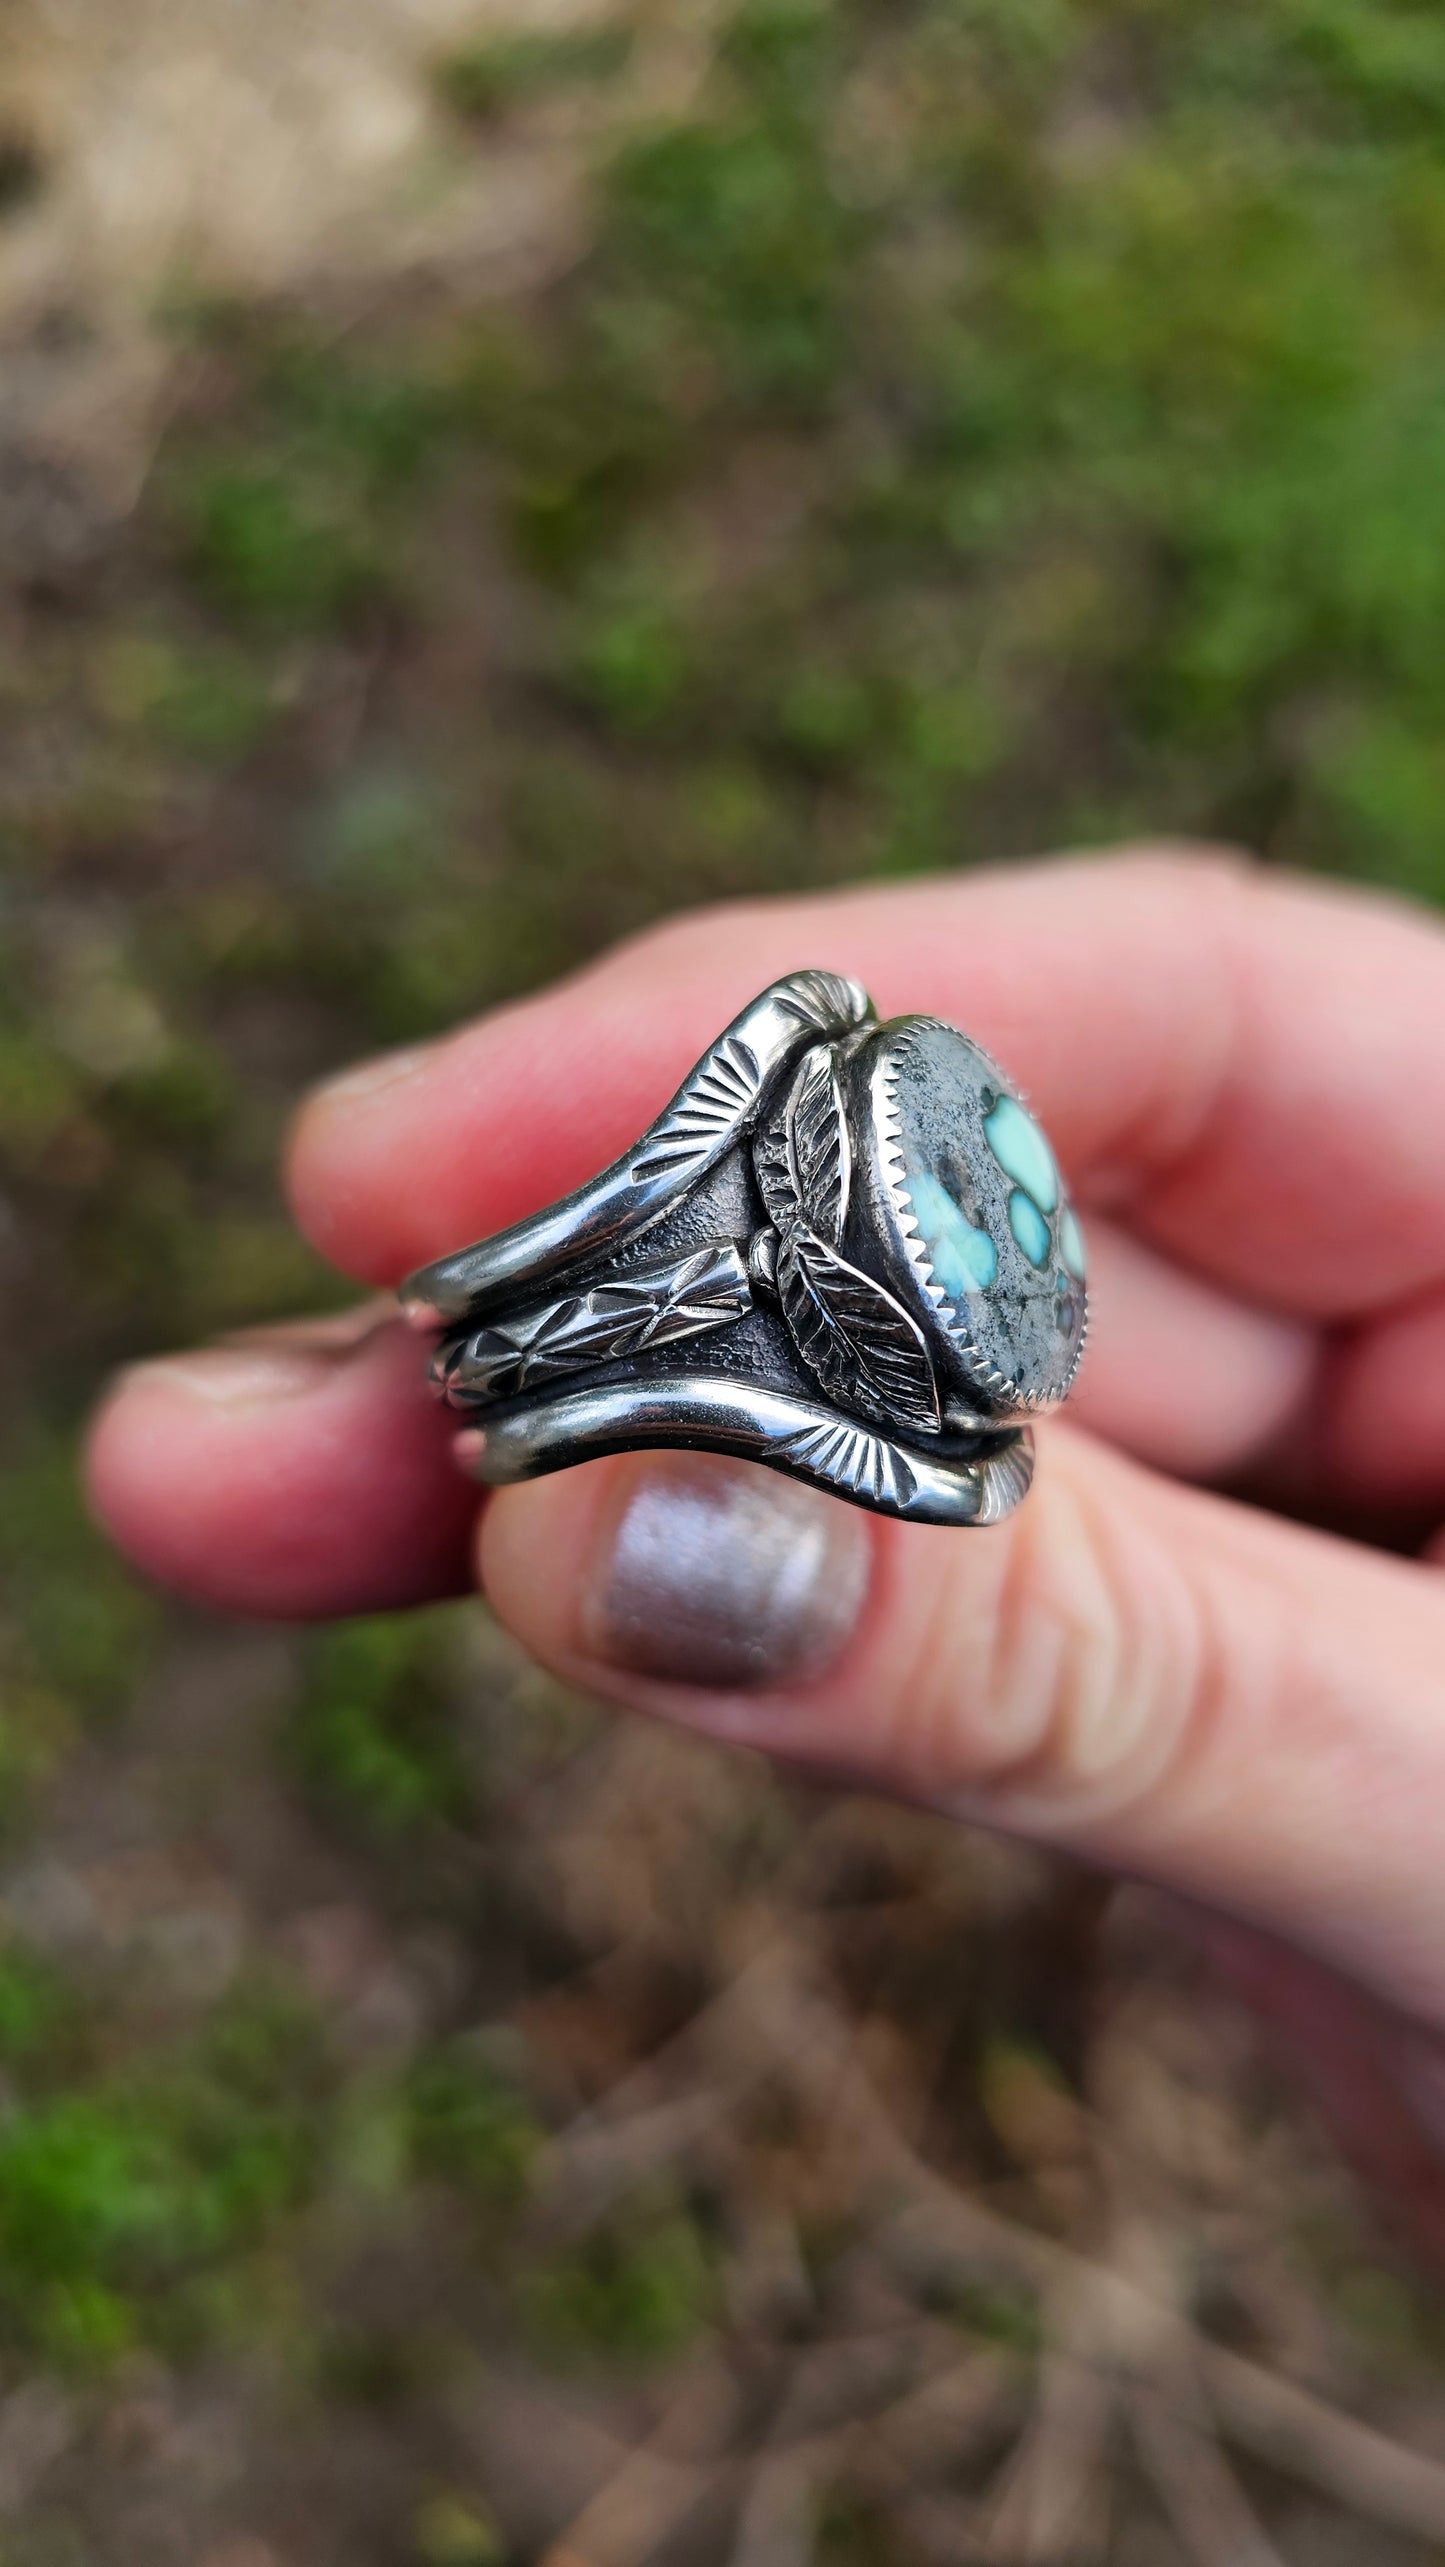 NIGHT CALYPSO Ring (fits like size 11) - in Fine and Sterling Silver